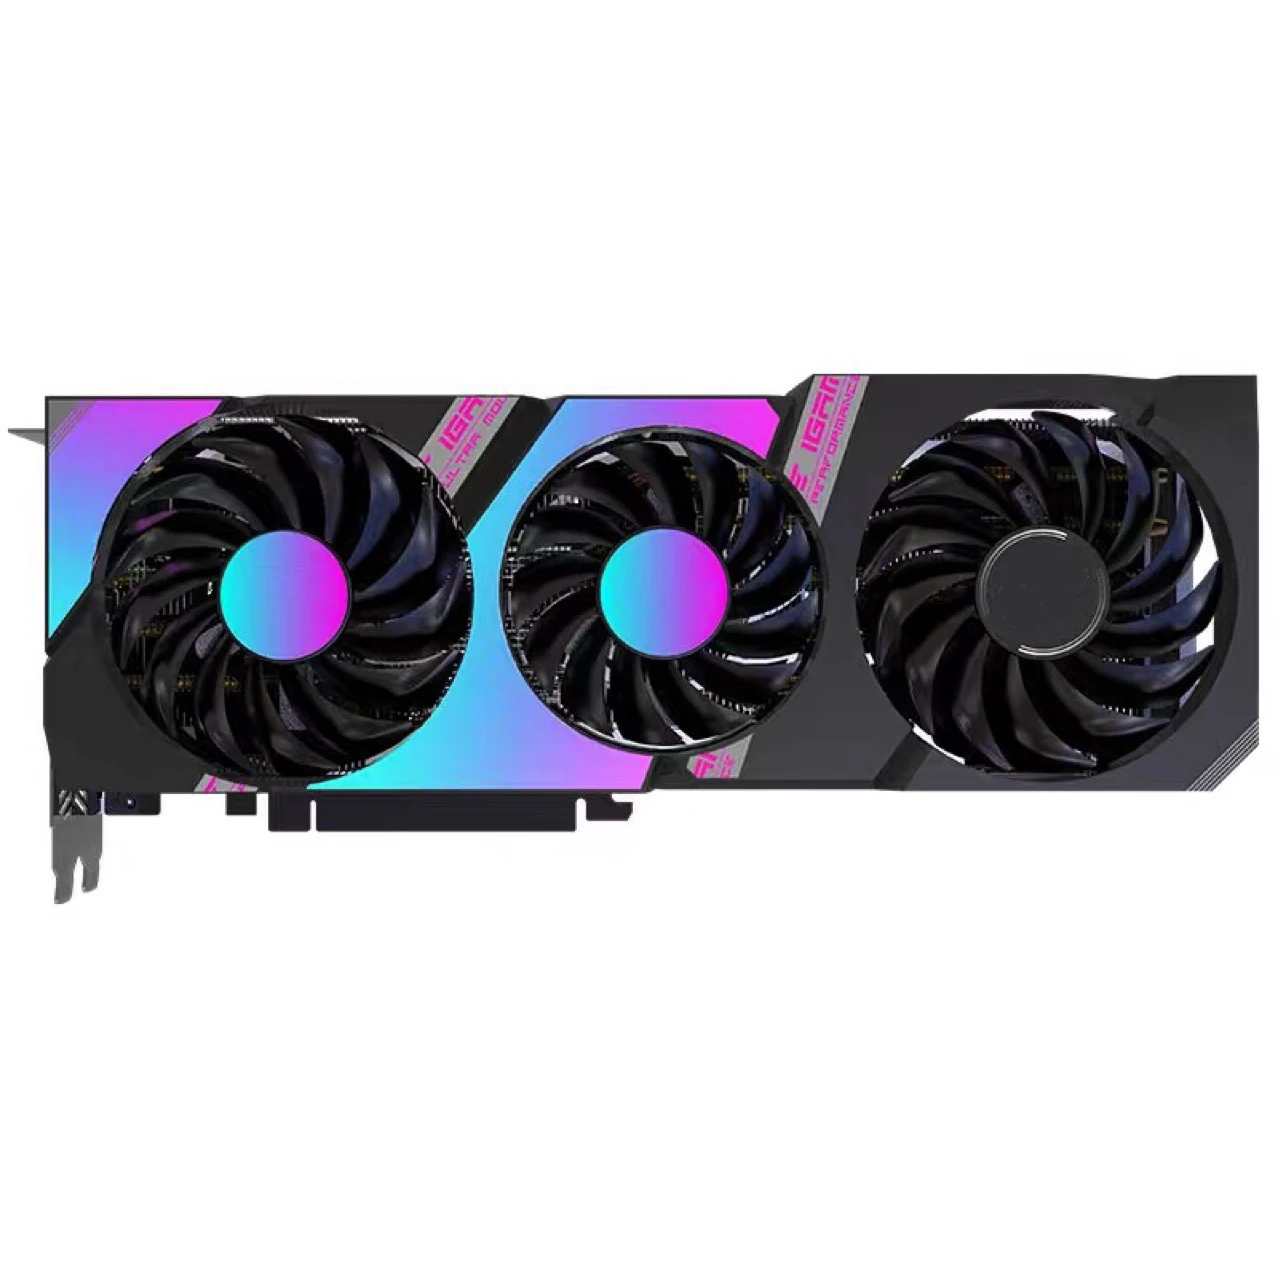 Colorful igame 3070. Colorful IGAME GEFORCE RTX 3080ultra OC 10g-v. Colorful GEFORCE RTX 3080 Ultra w OC. Colorful IGAME GEFORCE RTX 3070 ti Ultra w OC. Colorful IGAME RTX 3060 ti Ultra.